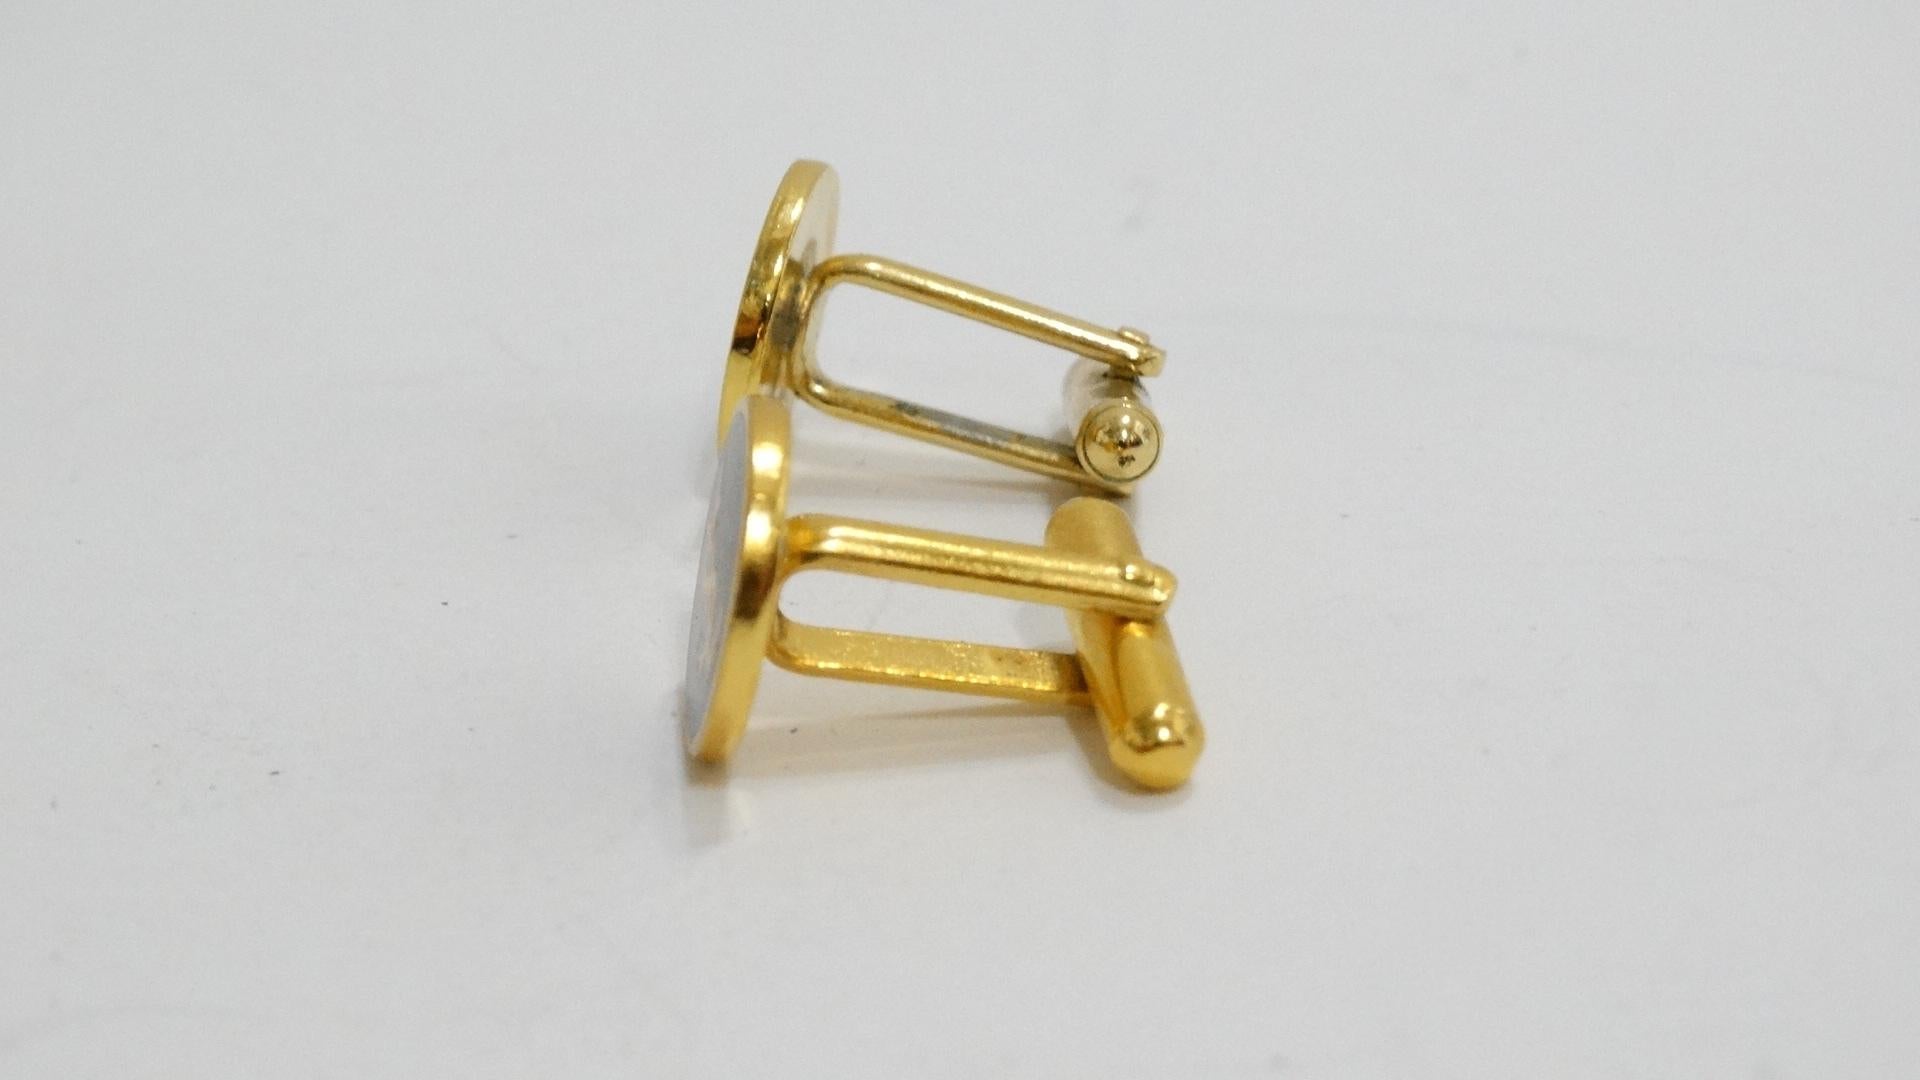 The perfect little accessory! Beautiful unisex cuff links by Yves Saint Laurent YSL, Gold tone hardware with a black front face which visibly displays the YSL Logo on both cufflinks. Comes in original box.
